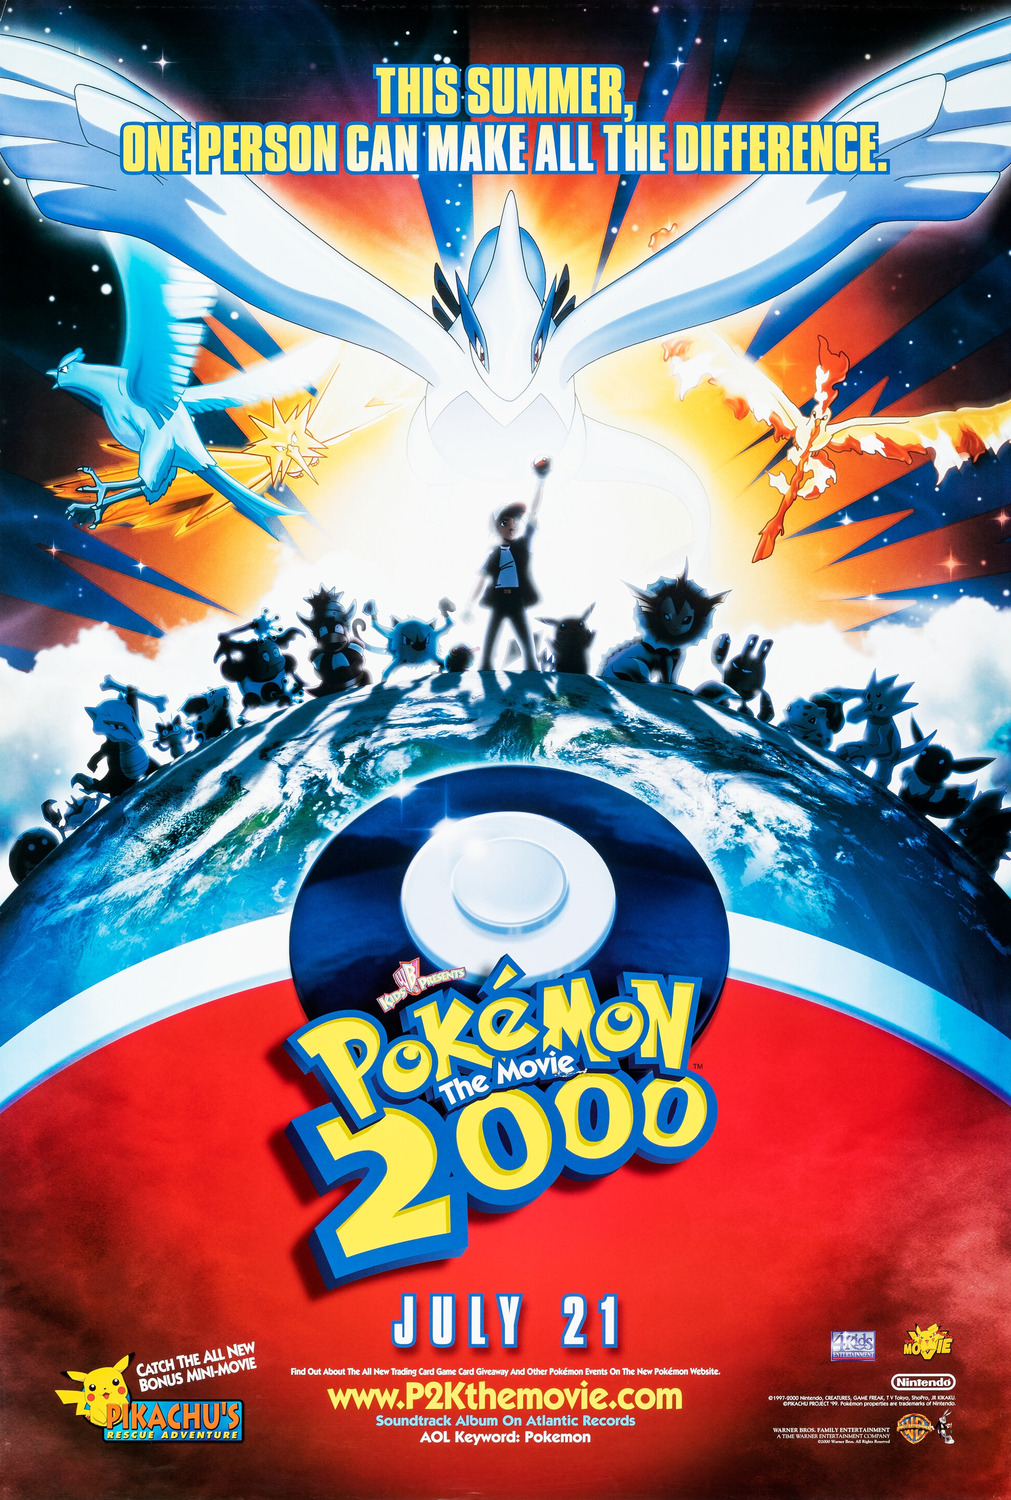 Extra Large Movie Poster Image for Pokemon 2000 